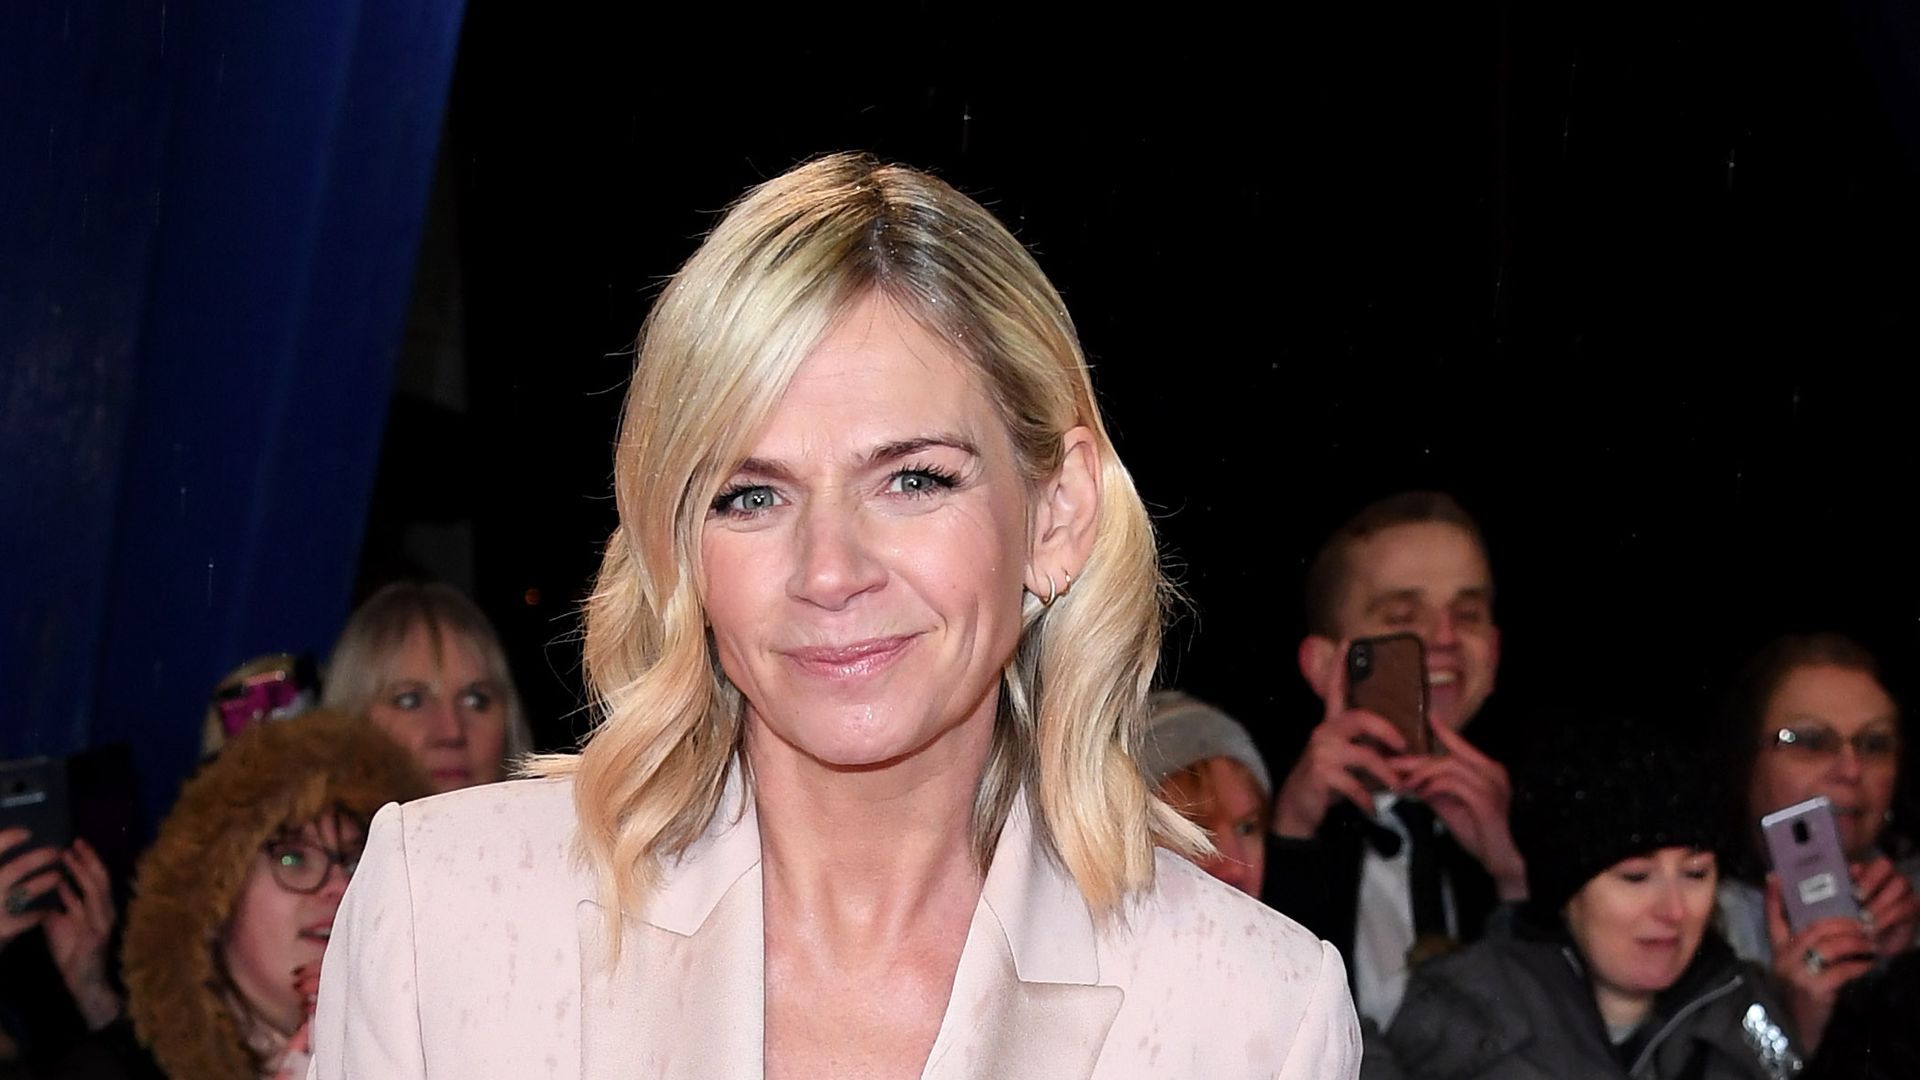 Zoe Ball attends the National Television Awards held at The O2 Arena on January 22, 2019 